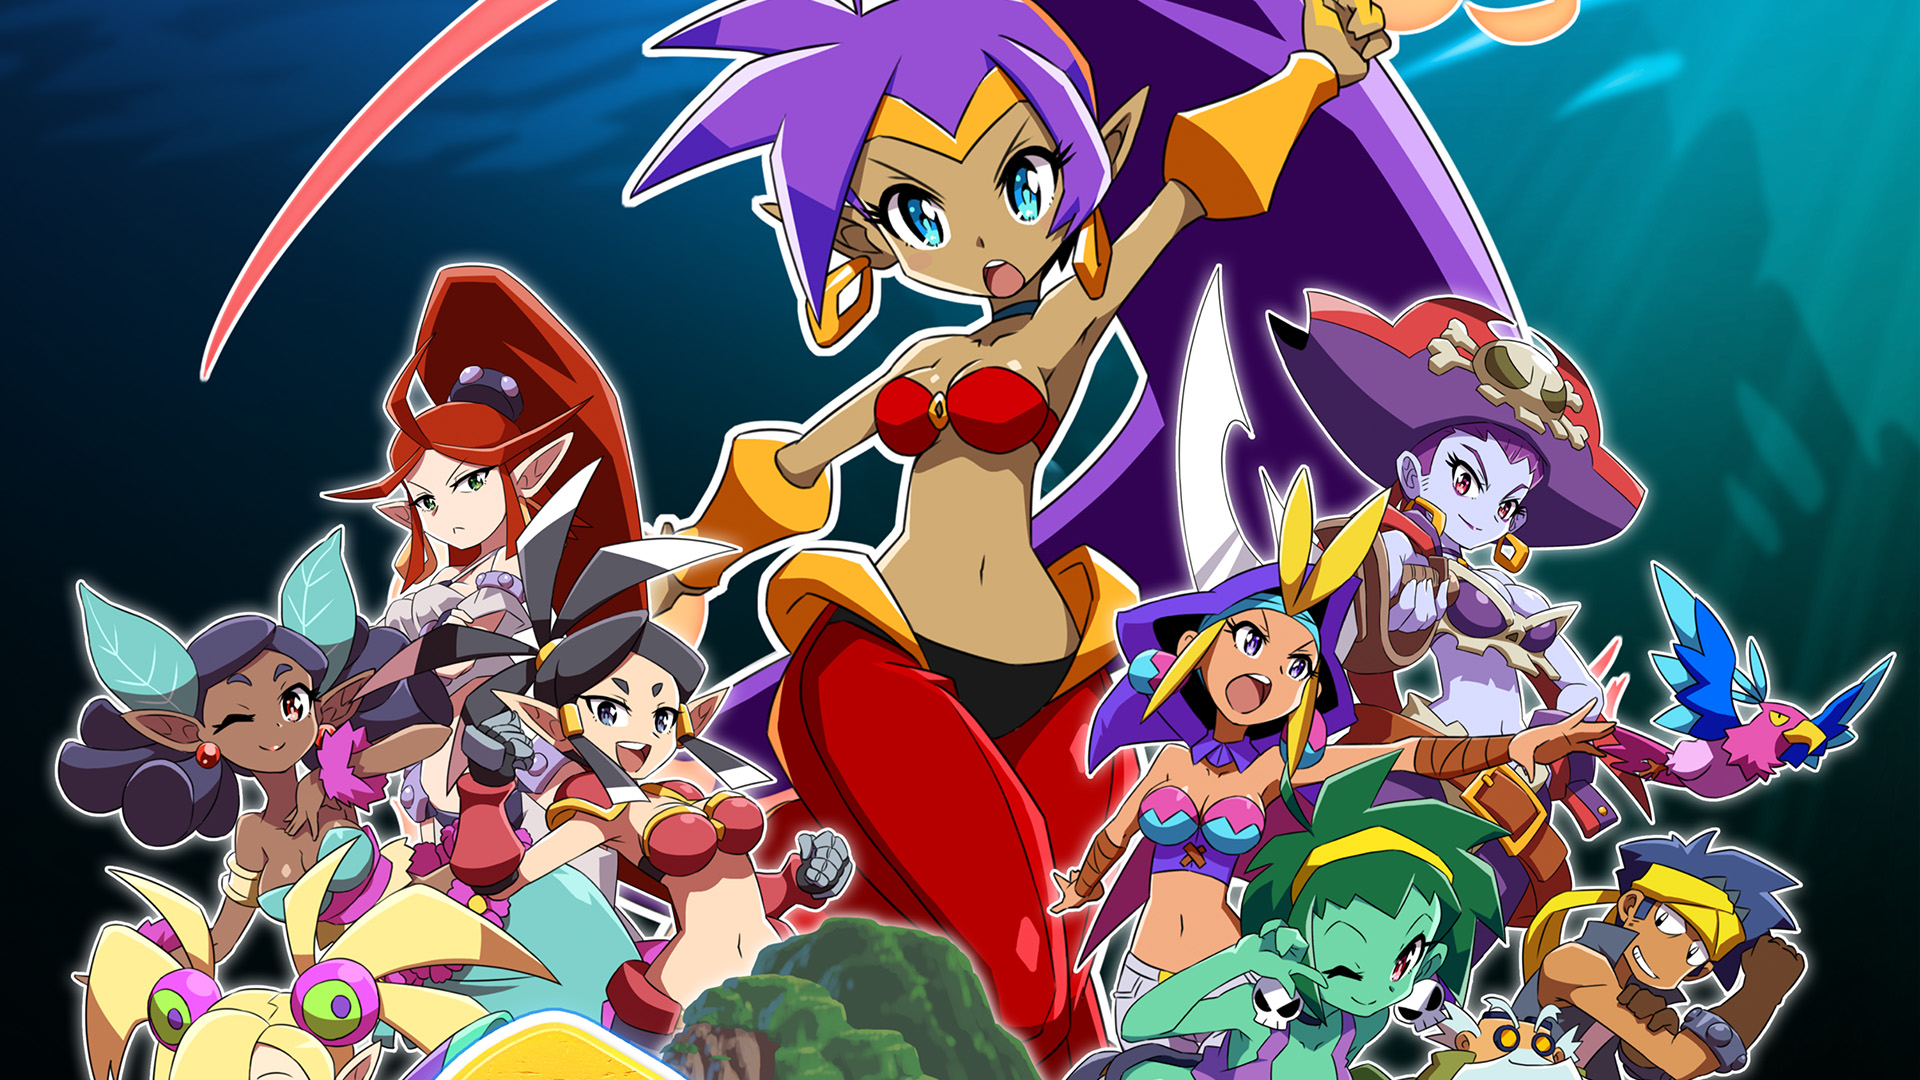 shantae and the seven sirens switch physical